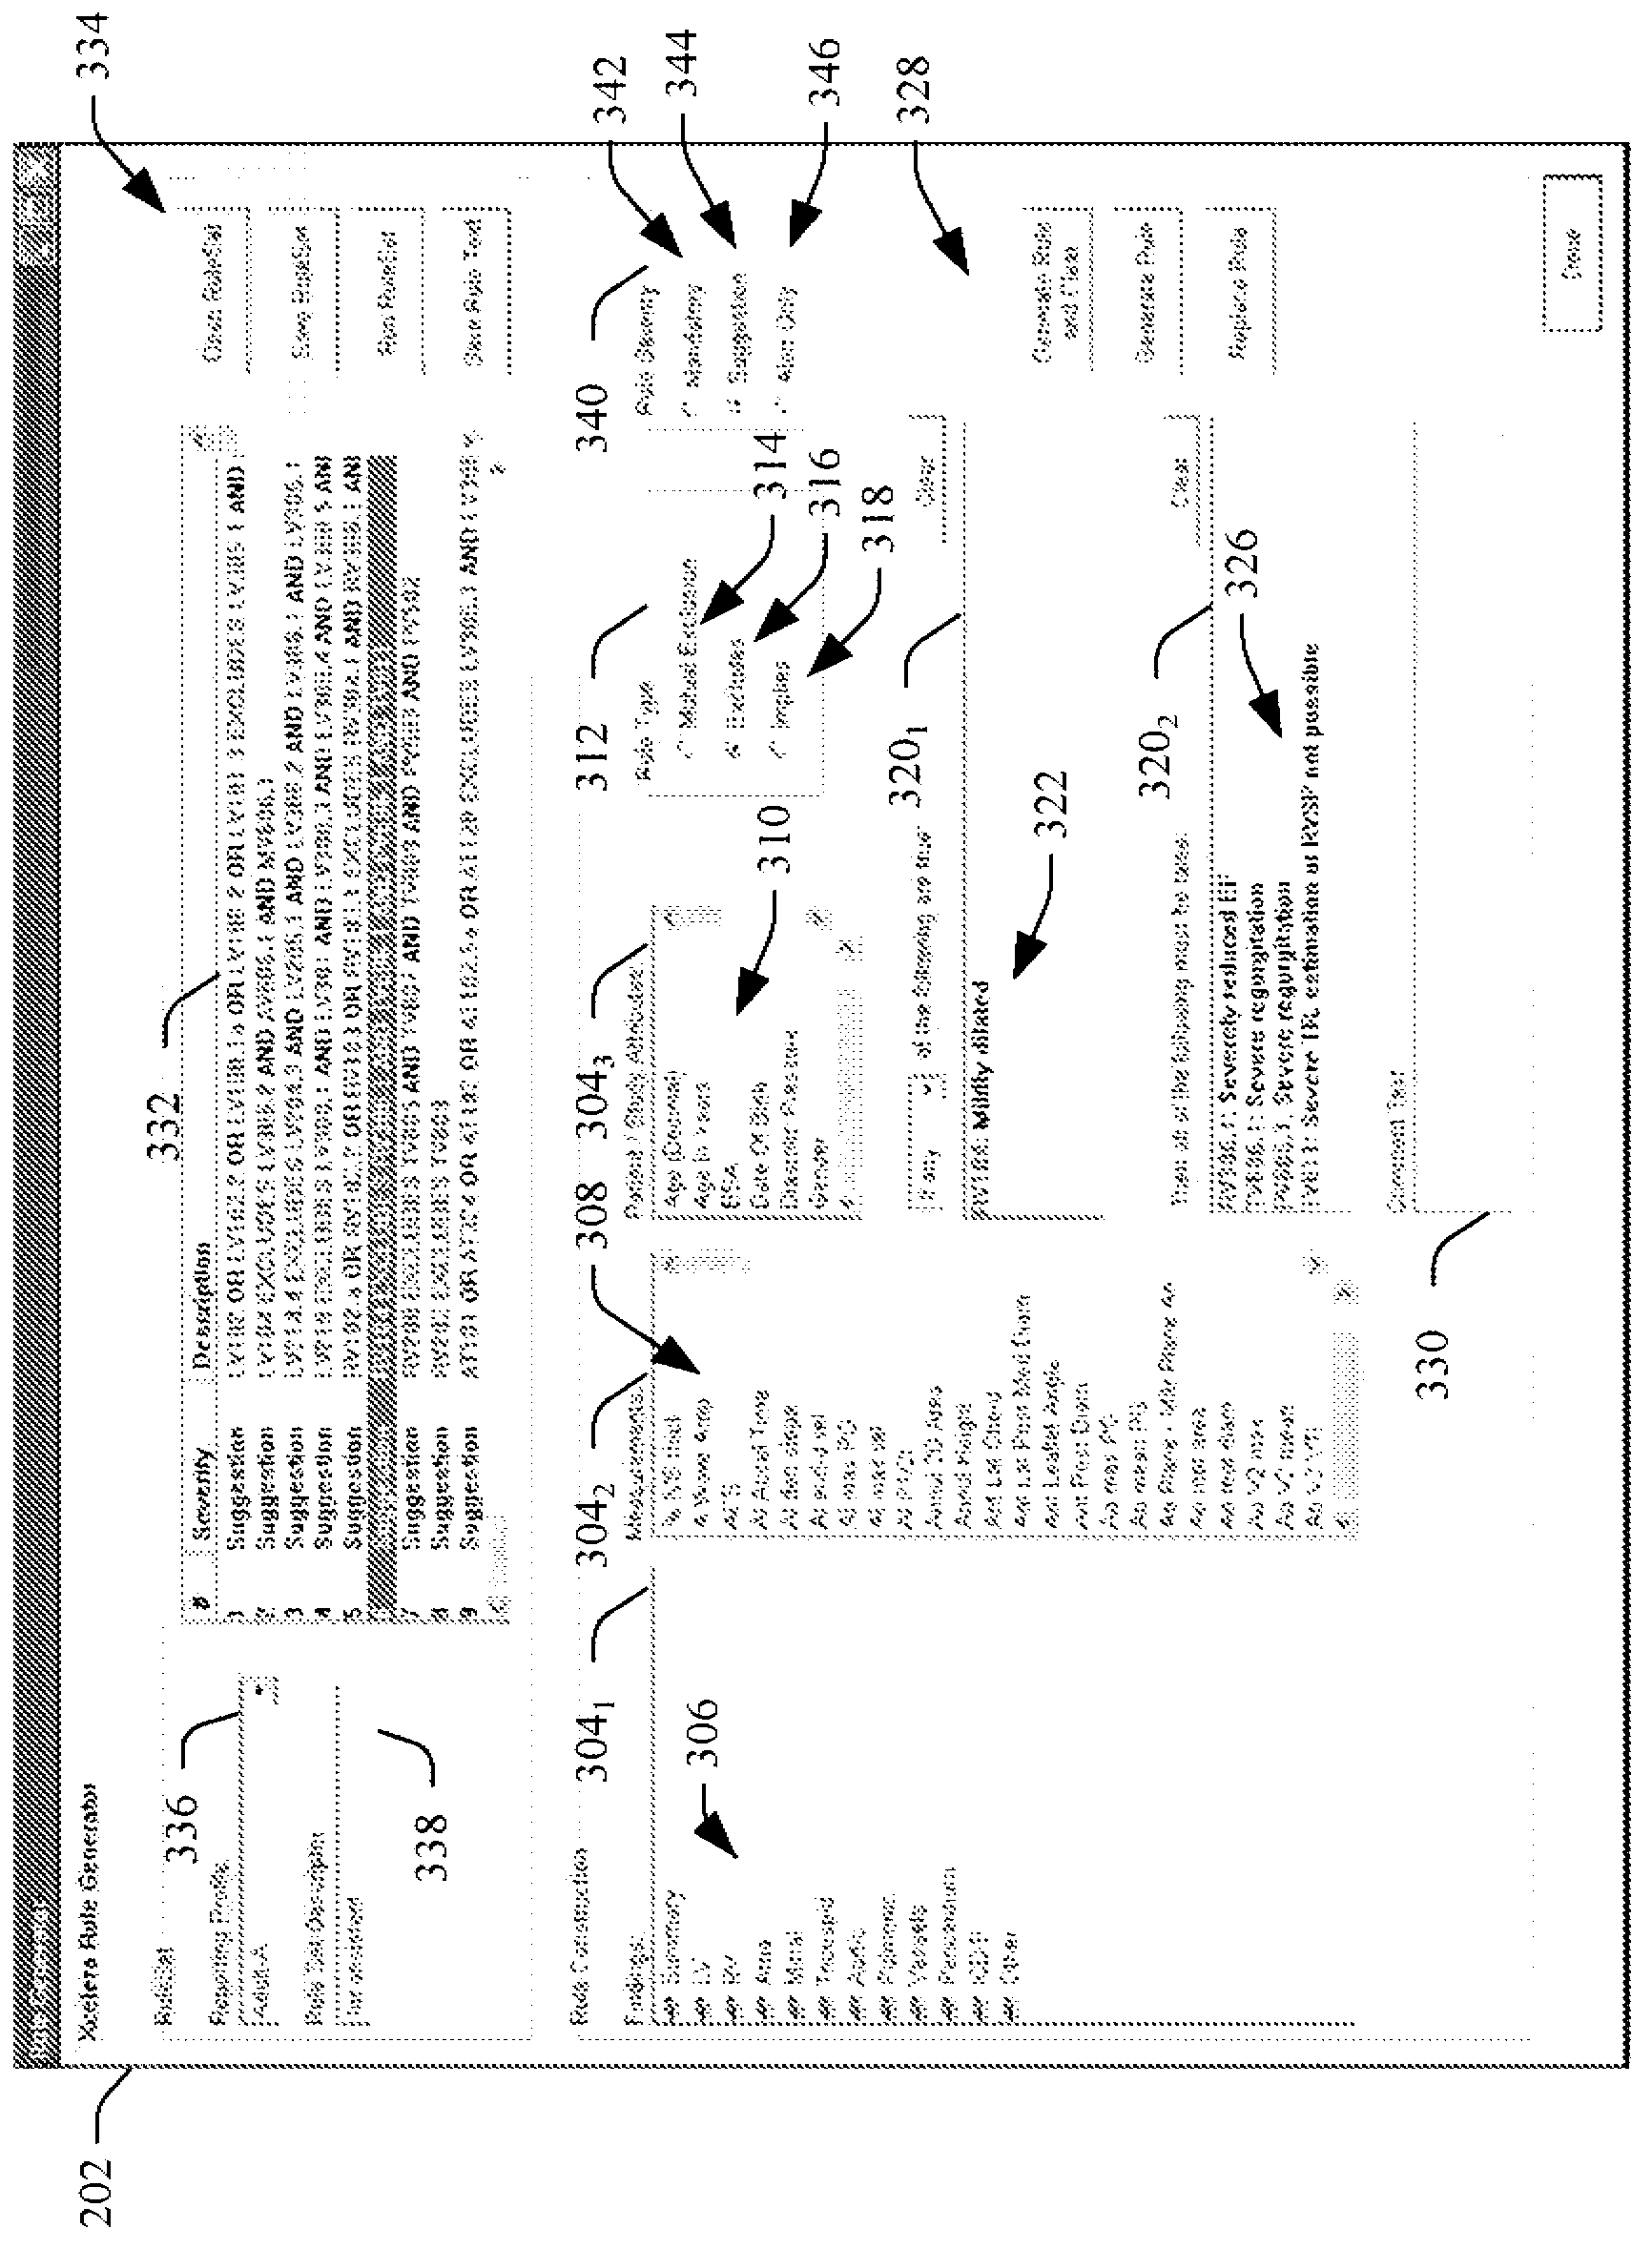 Medical information system ruleset creation and/or evaluation graphical user interface